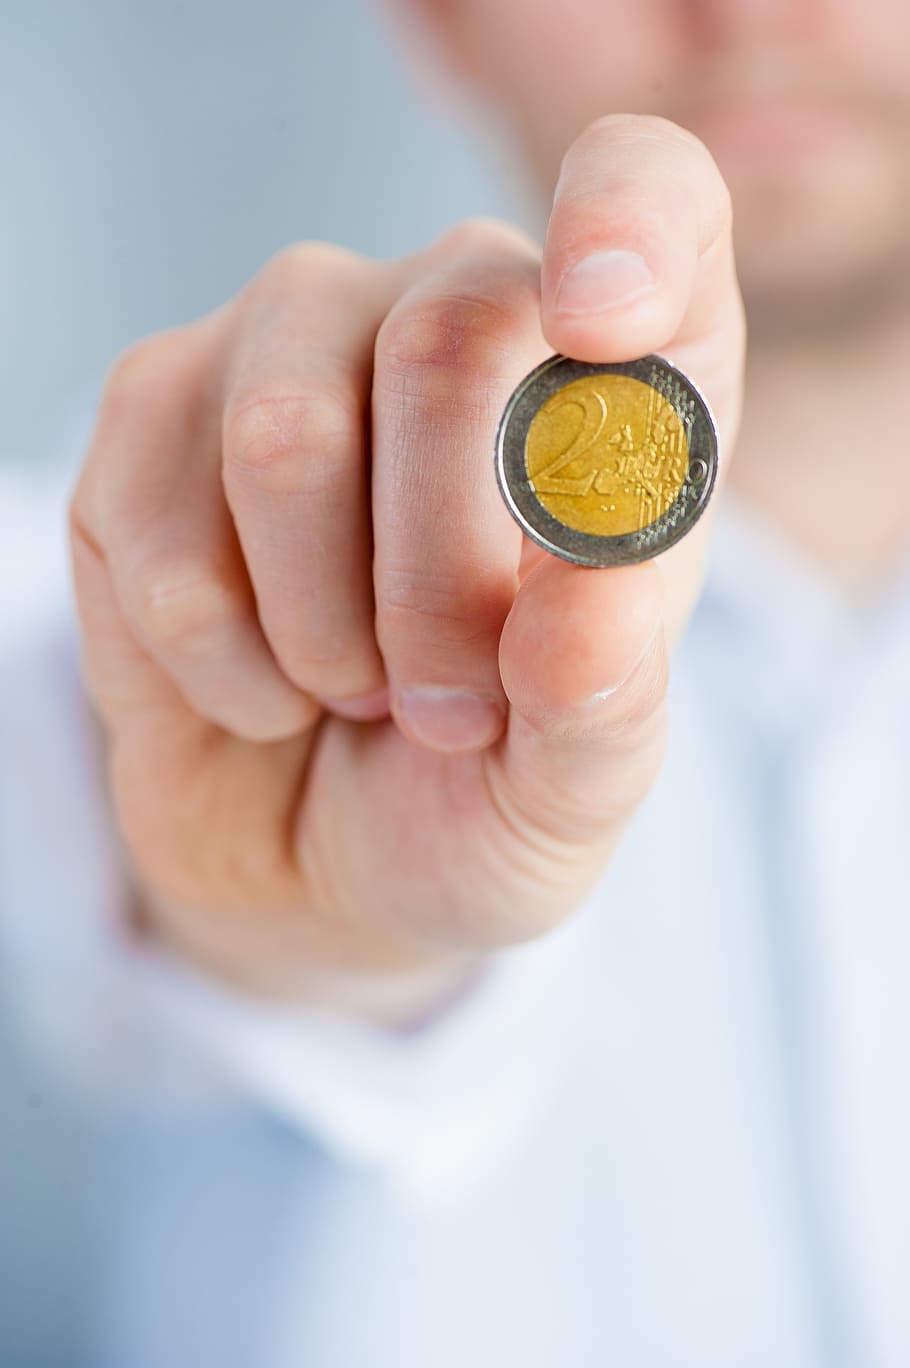 person, holding, round silver-colored coin, coin, coins, money, savings, a wealth of, rich, glossy